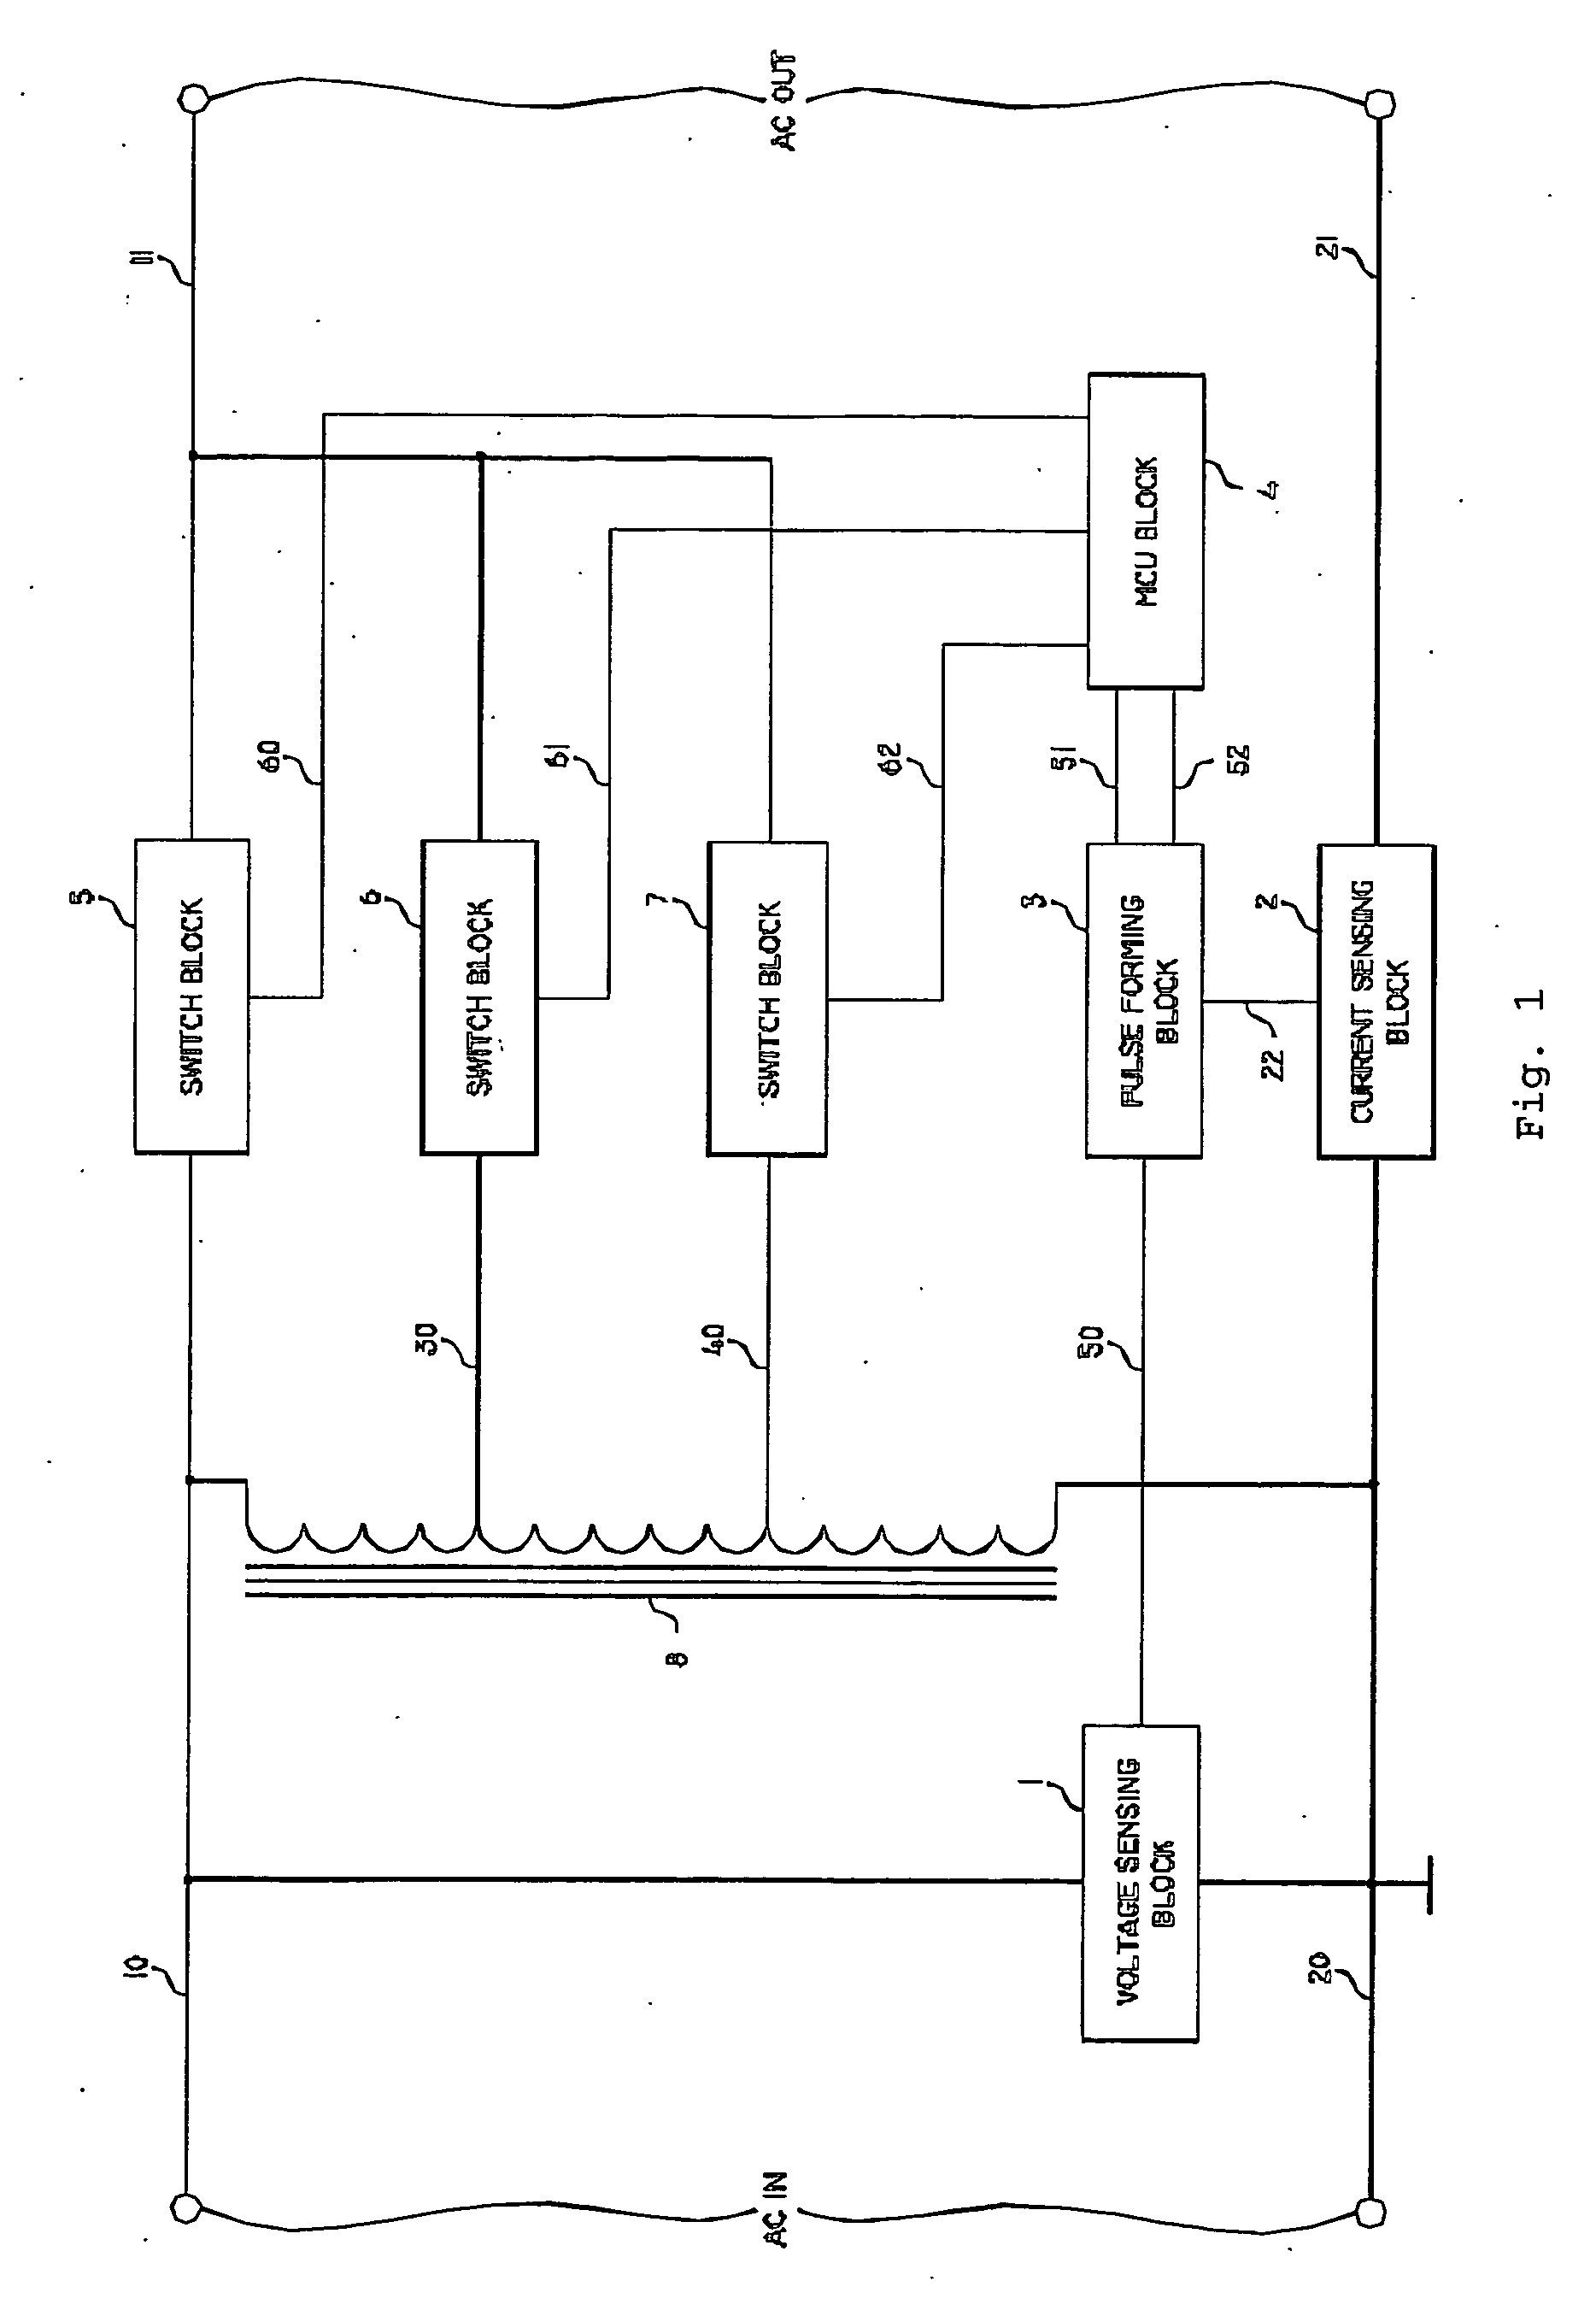 Step sinusoidal voltage controlling method for hid, flourescent and incandescent light dimming applications